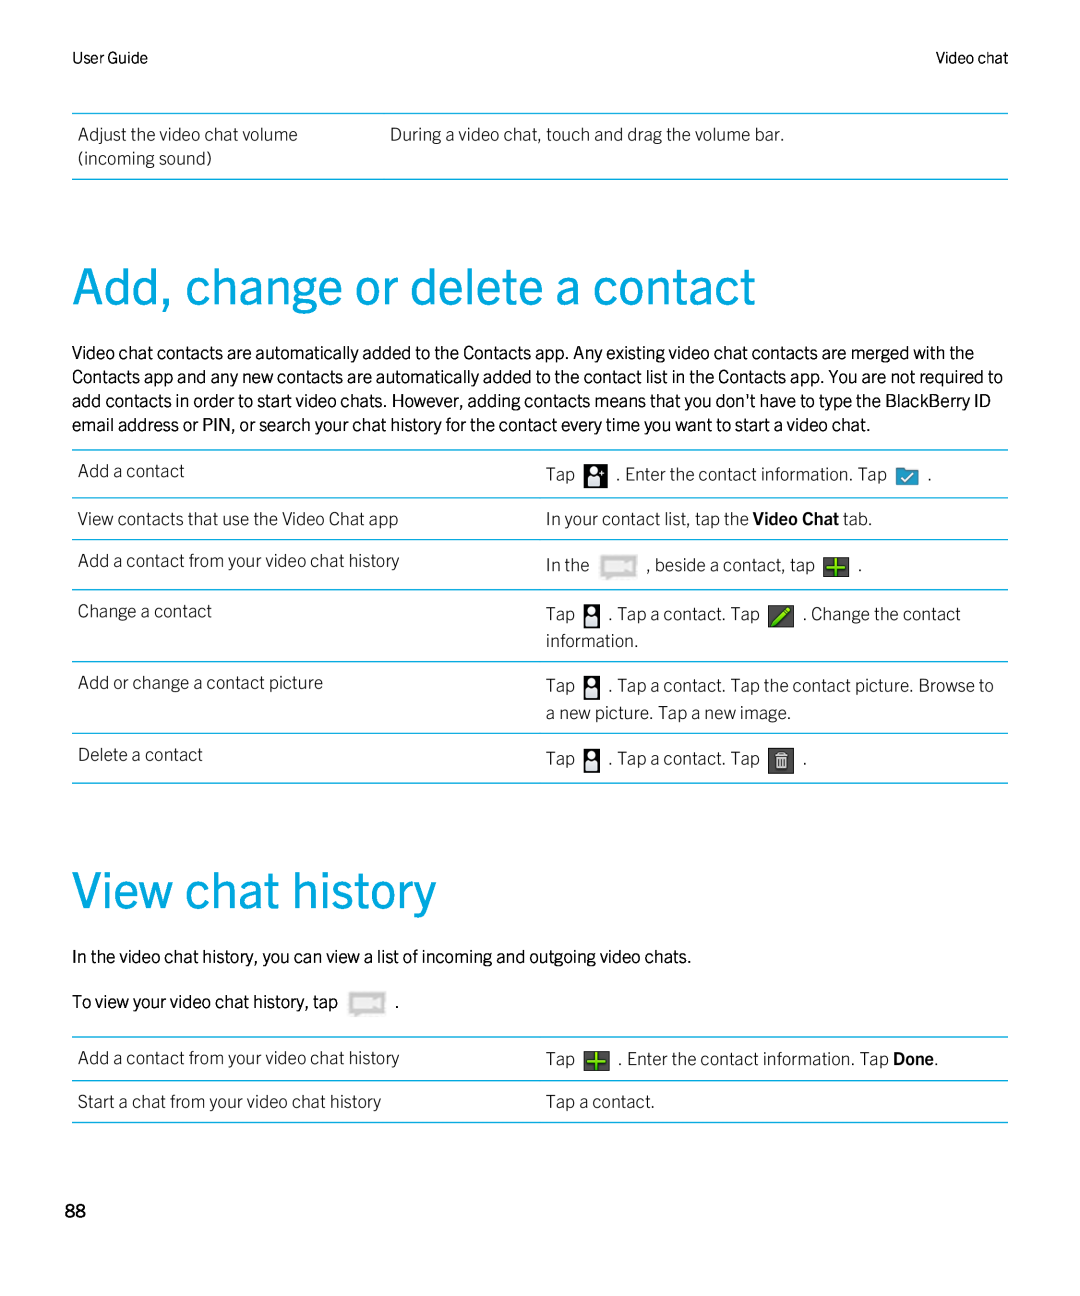 Blackberry 2.0.1 manual View chat history, Add, change or delete a contact 